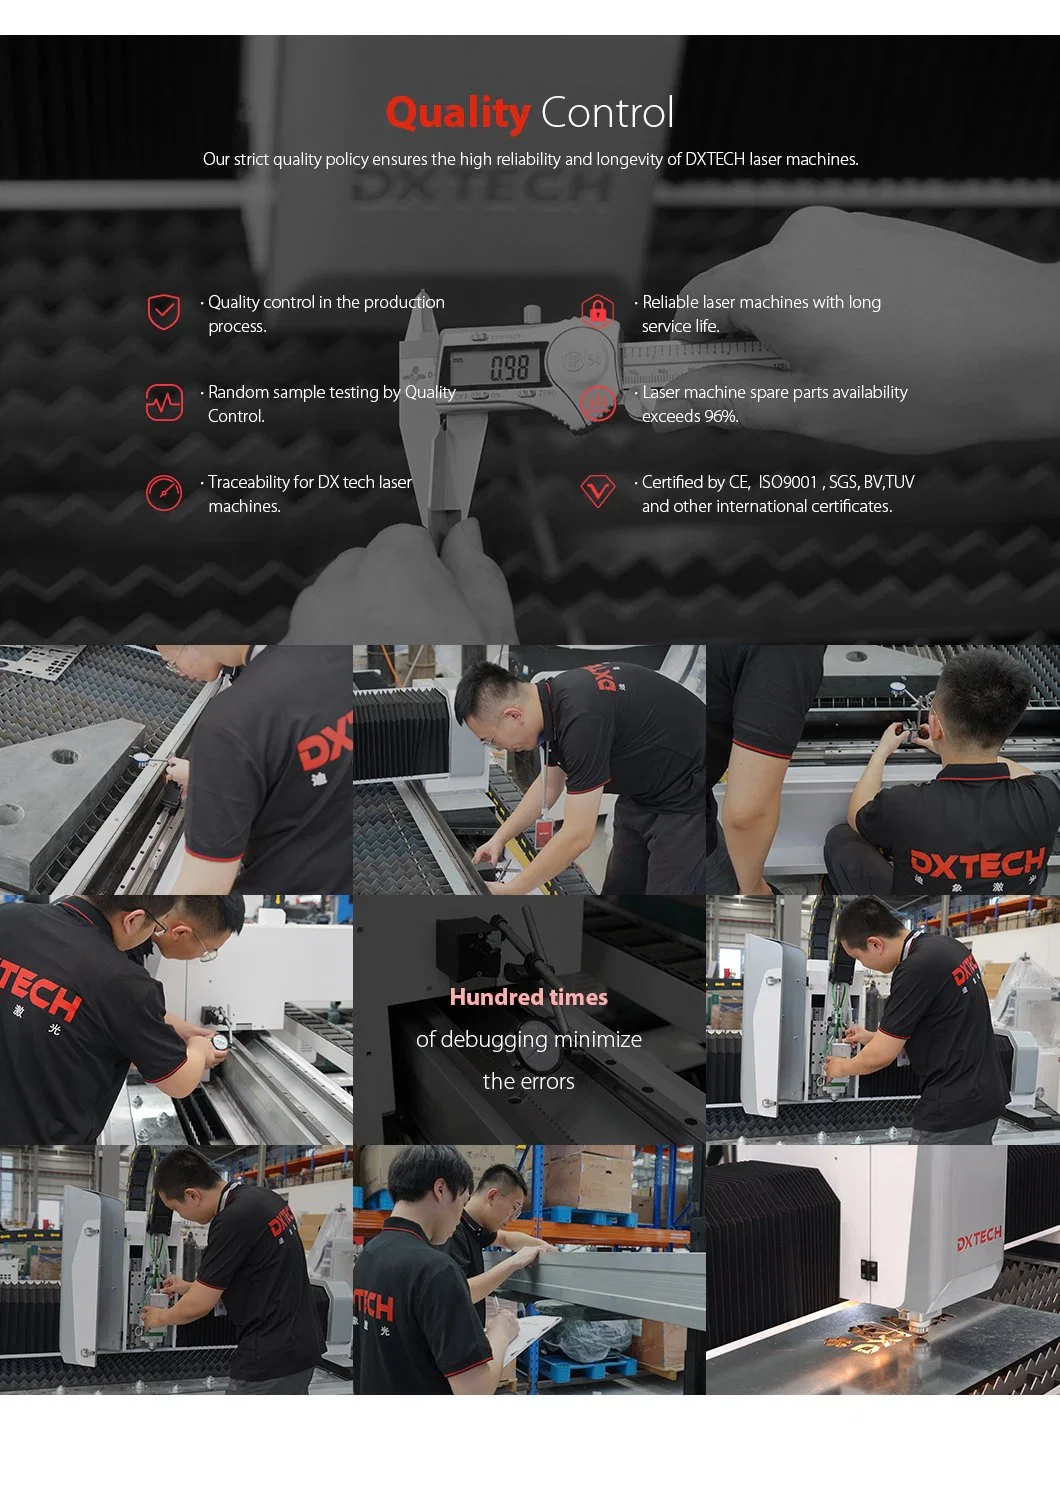 Dxtech Reasonable Price 1325 130W CO2 Marking Machine Engraving Machine for Acrylic Leather Plywood Fabric